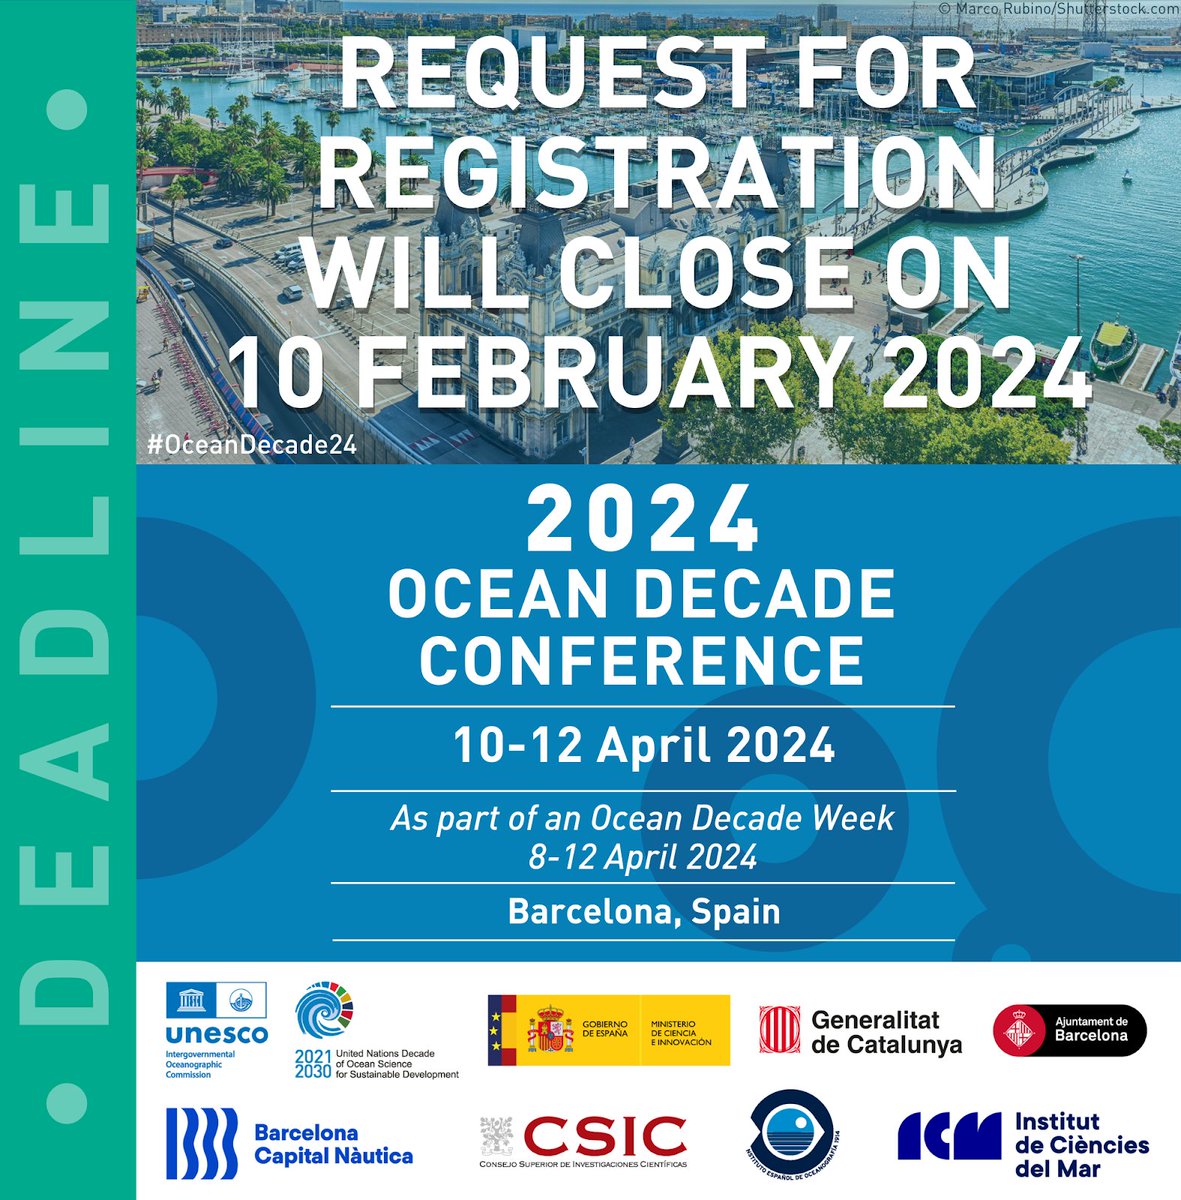 🔵 Calling the global ocean community! 🔵 The request for registration for the #OceanDecade24 Conference closes this Saturday, 10 February at 23.59h UTC. Places are limited so if you haven't done it yet, make sure to submit your request now: ow.ly/QheB50QnHk5